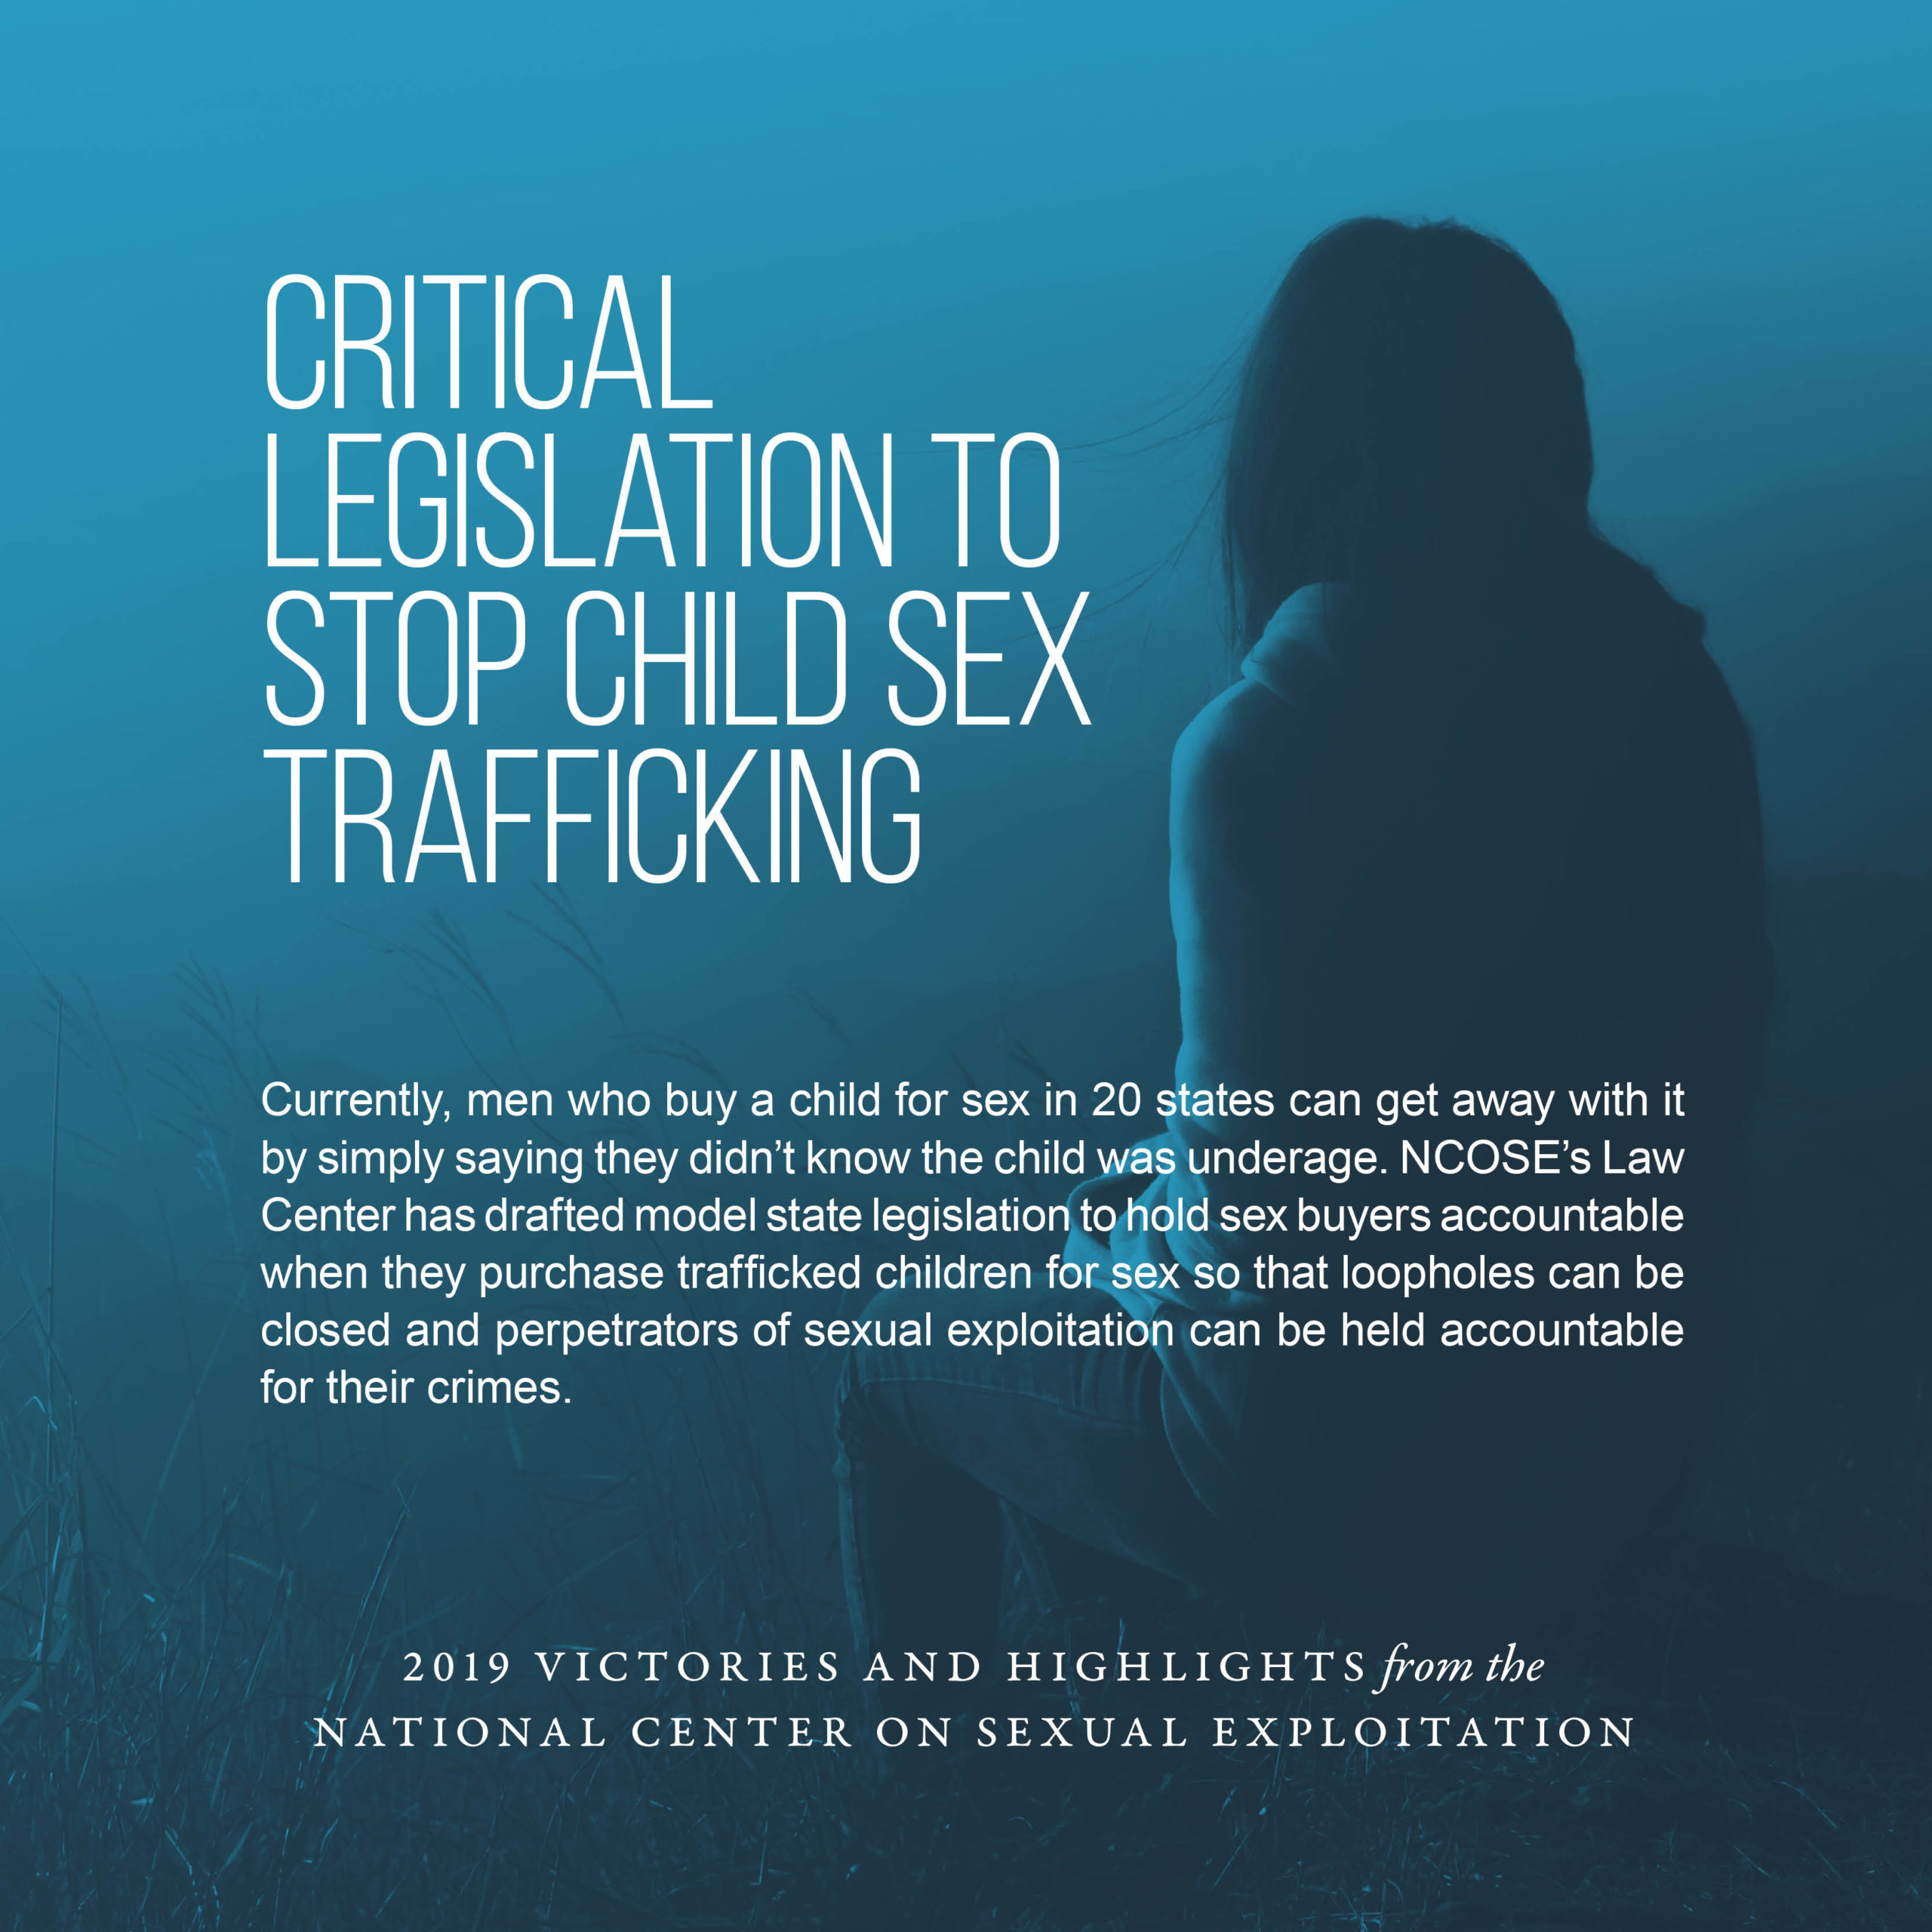 Fighting "Mistake of Age" Defenses That Put Children at Risk (Info on the fight to end sexual exploitation)